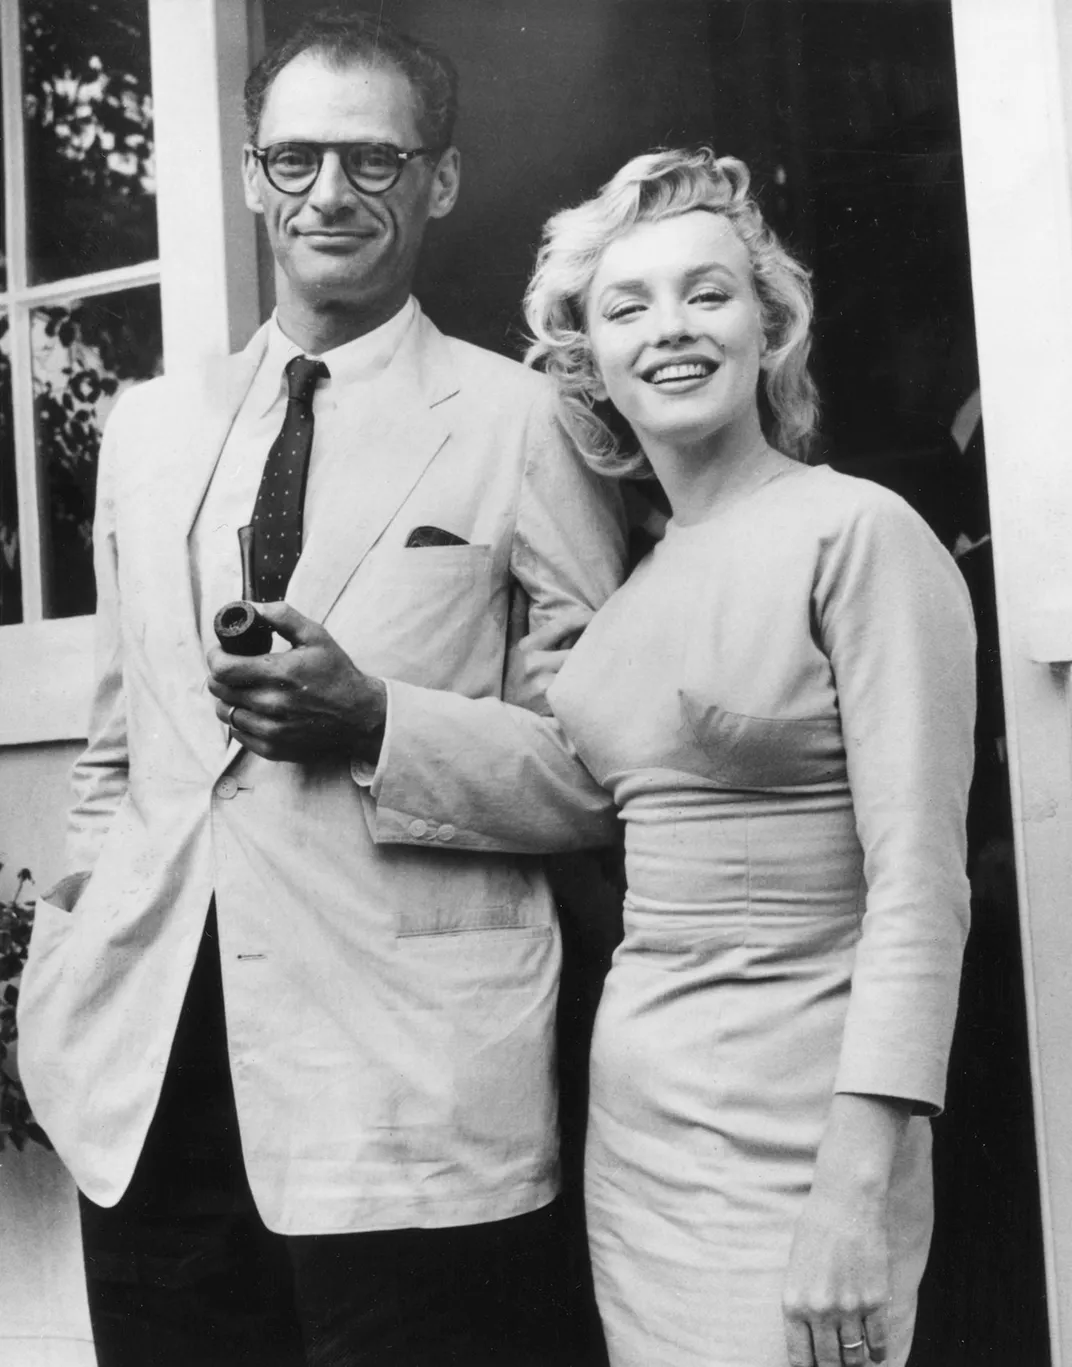 Monroe and her third husband, playwright Arthur Miller, in 1956